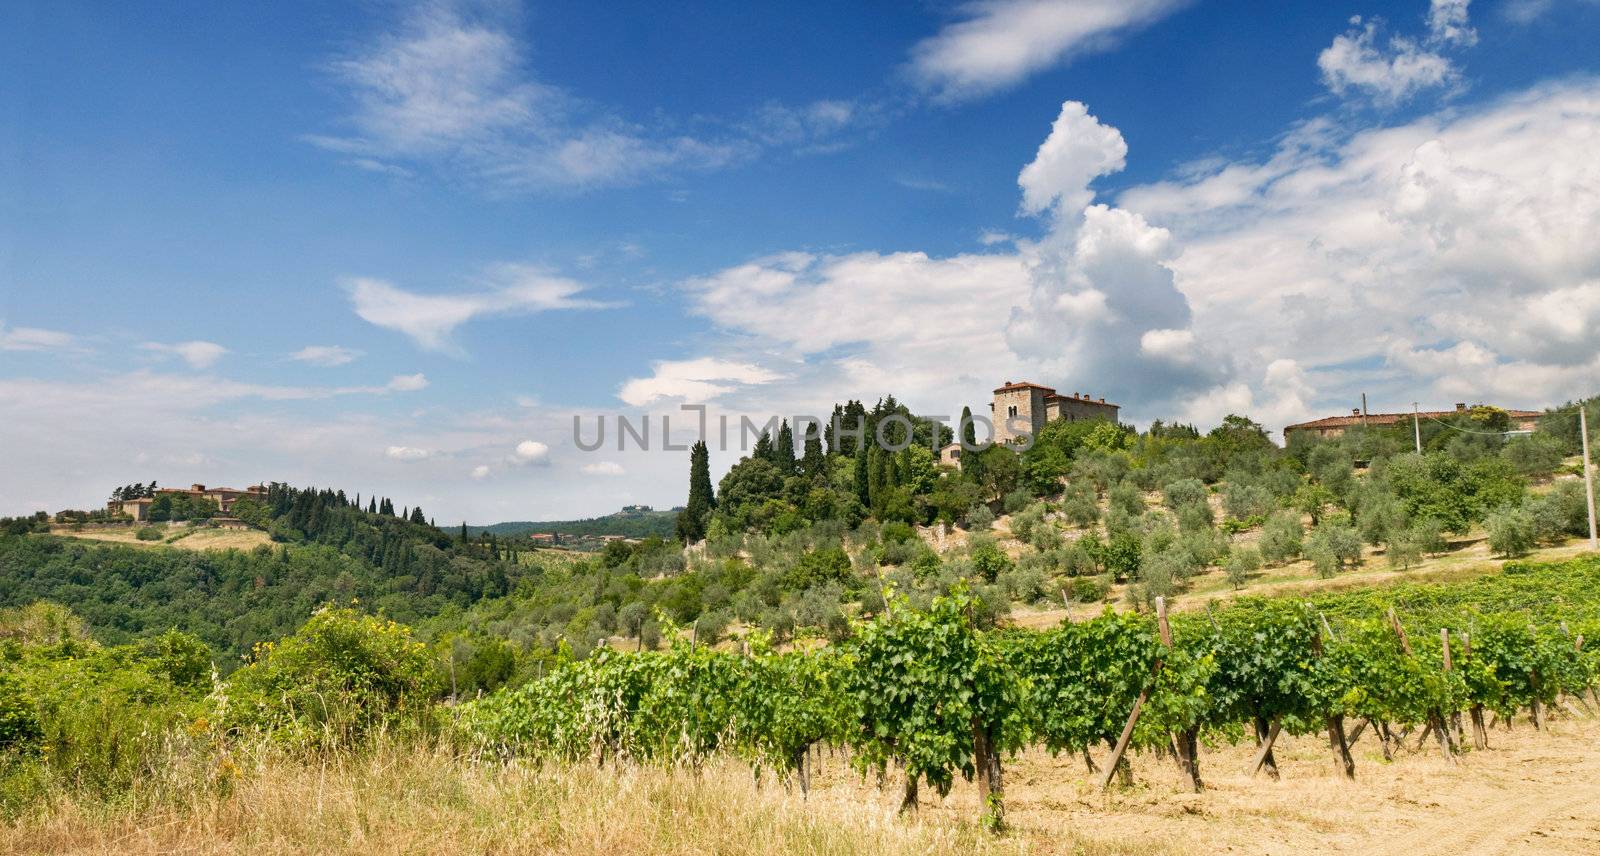 Tuscany Villa in Umbria, Italy, surrounded by wine and a summer landscape 